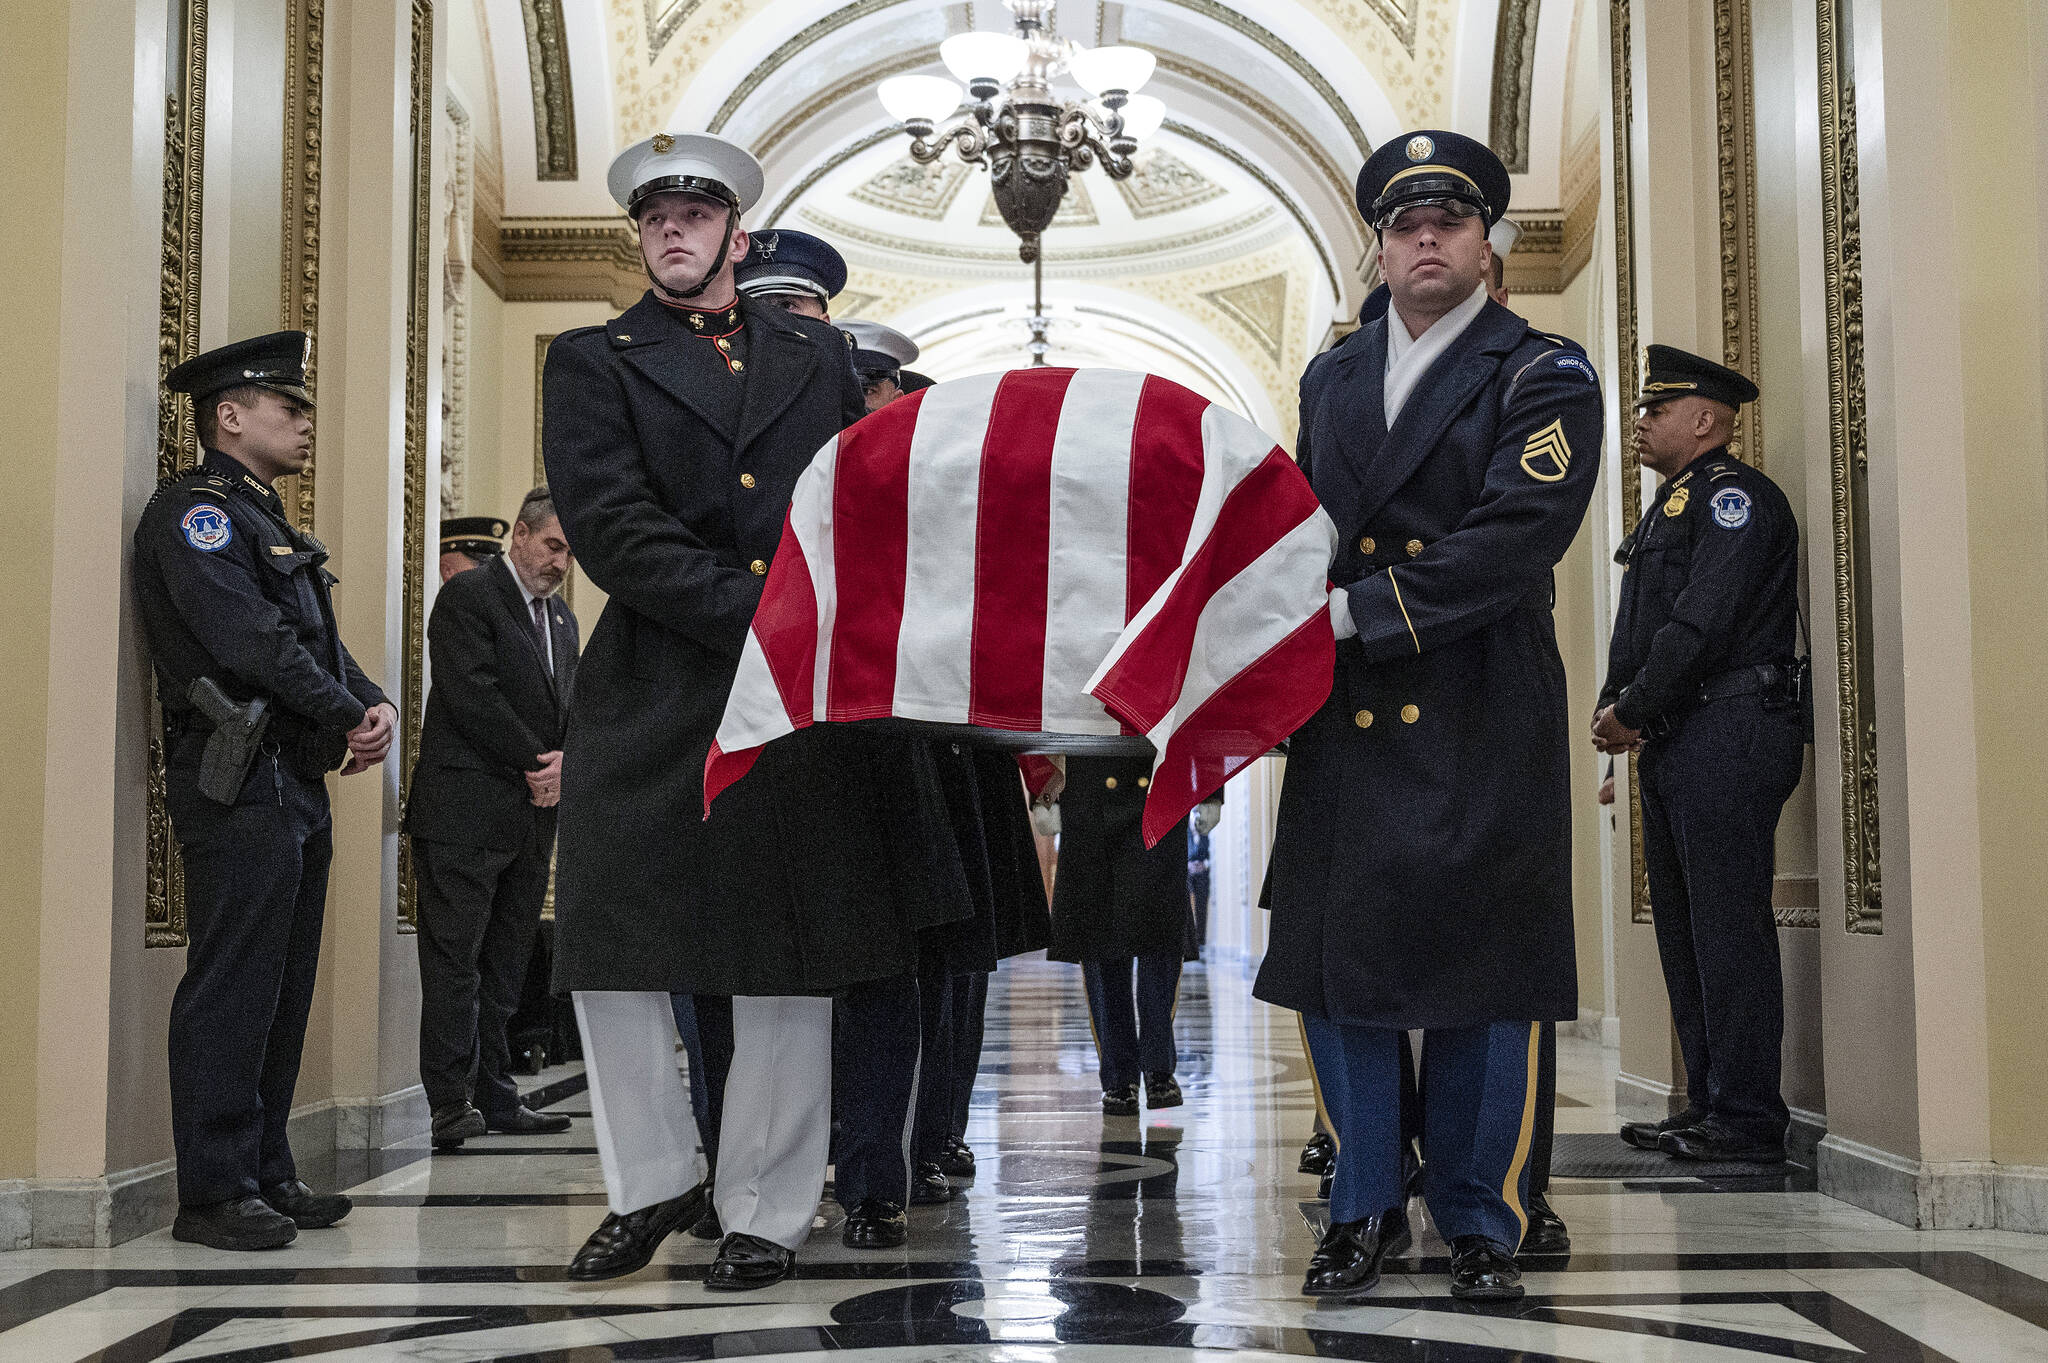 An honor guard carries the flag-draped casket of former Rep. Don Young, R-Alaska, into the U.S. Capitol where he will lie in state in Washington, Tuesday, March 29, 2022. (Jim Watson/Pool Photo via AP)